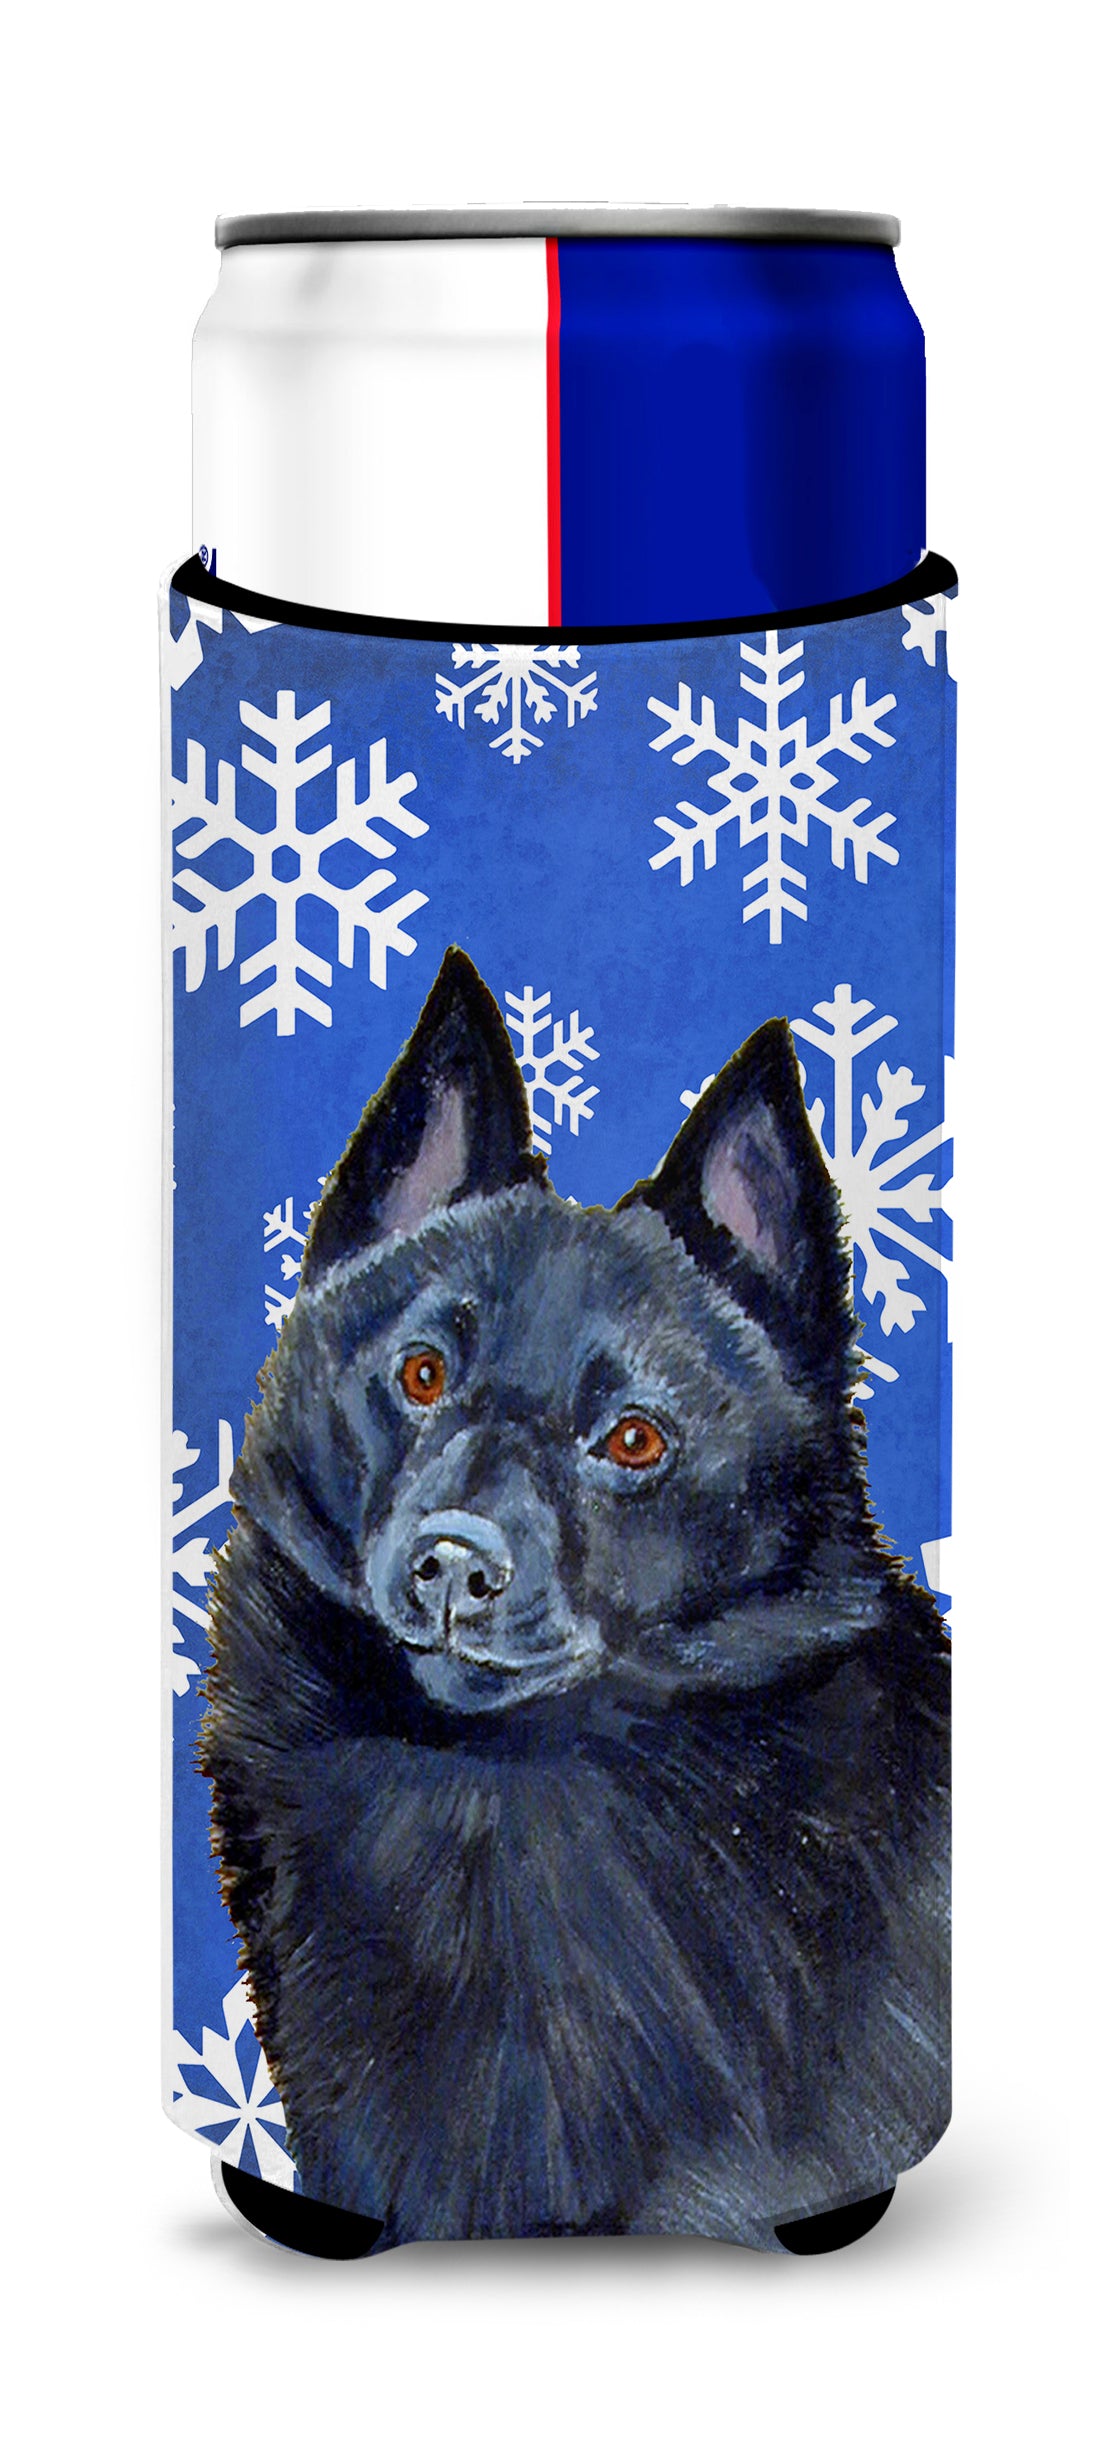 Schipperke Winter Snowflakes Holiday Ultra Beverage Insulators for slim cans LH9294MUK.